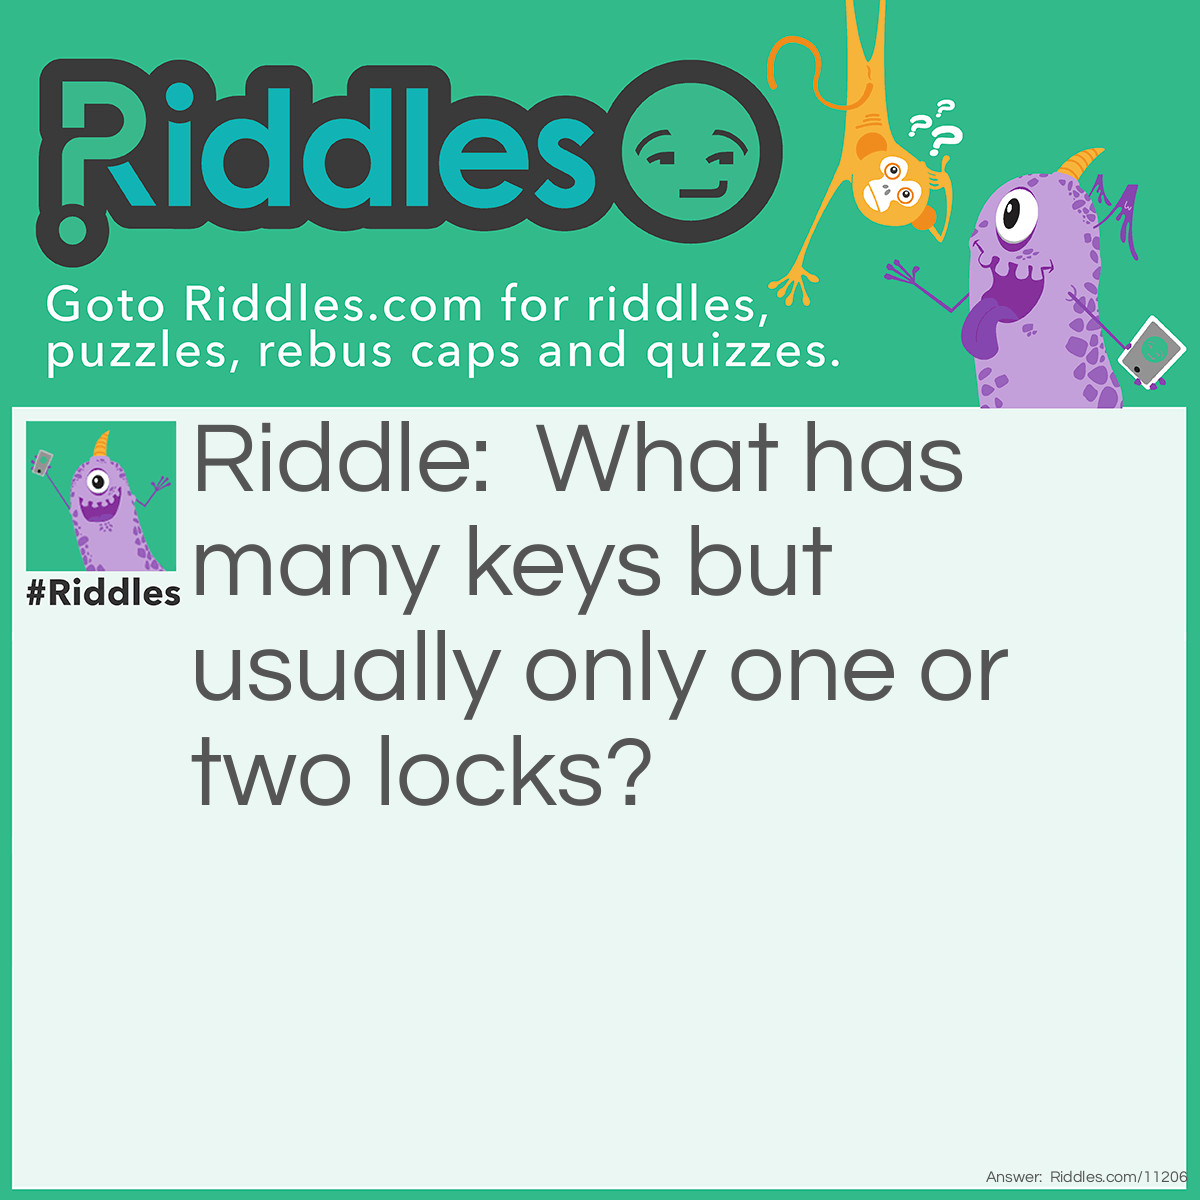 Riddle: What has many keys but usually only one or two locks? Answer: A keyboard.